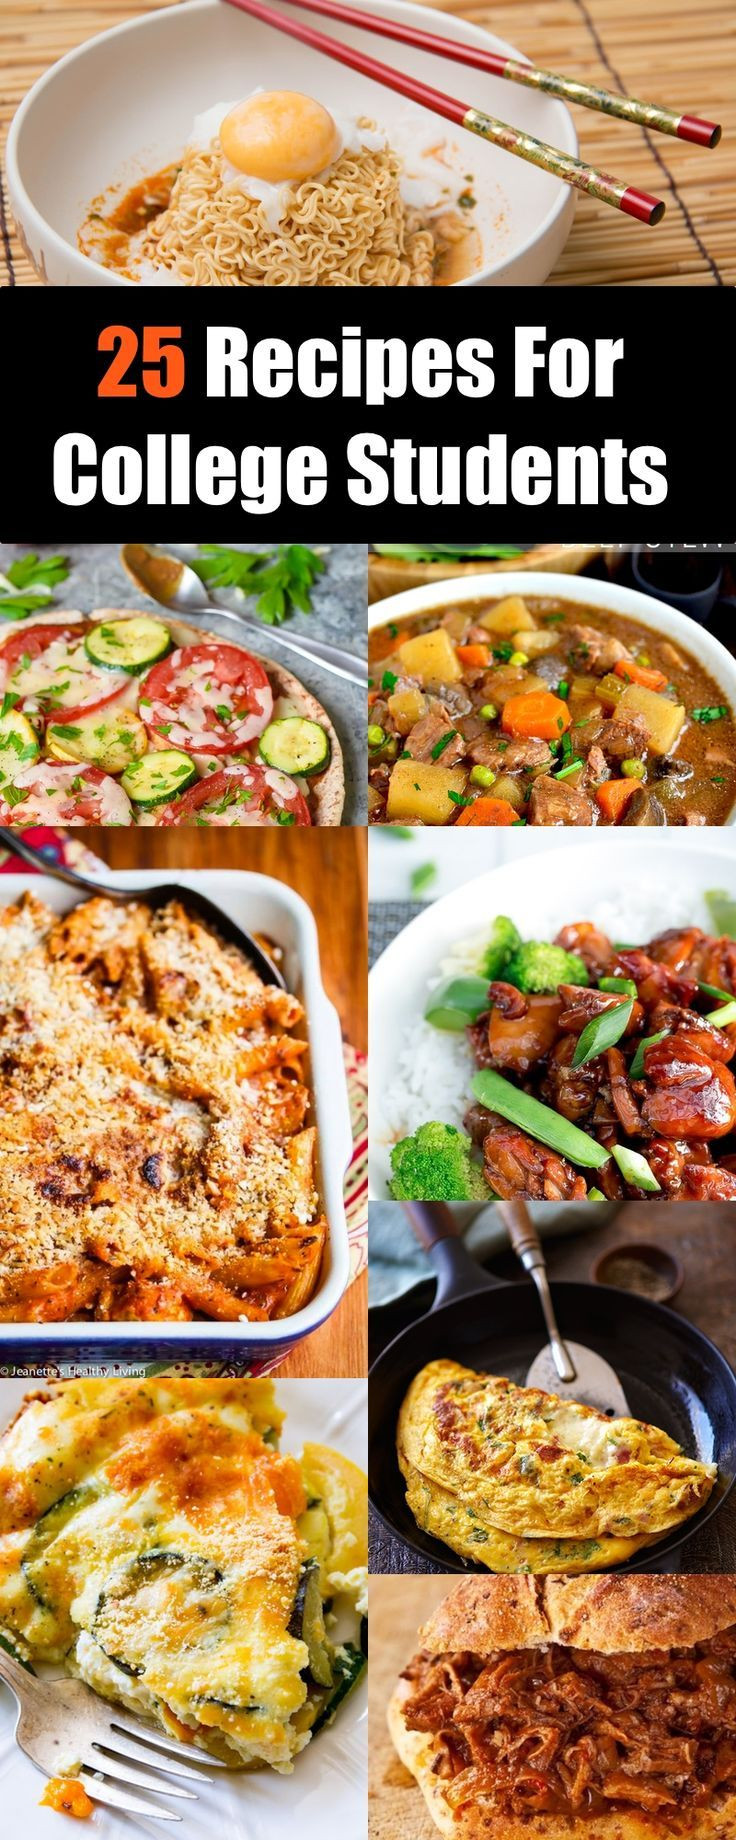 Healthy Dinners For College Students
 100 College student recipes on Pinterest